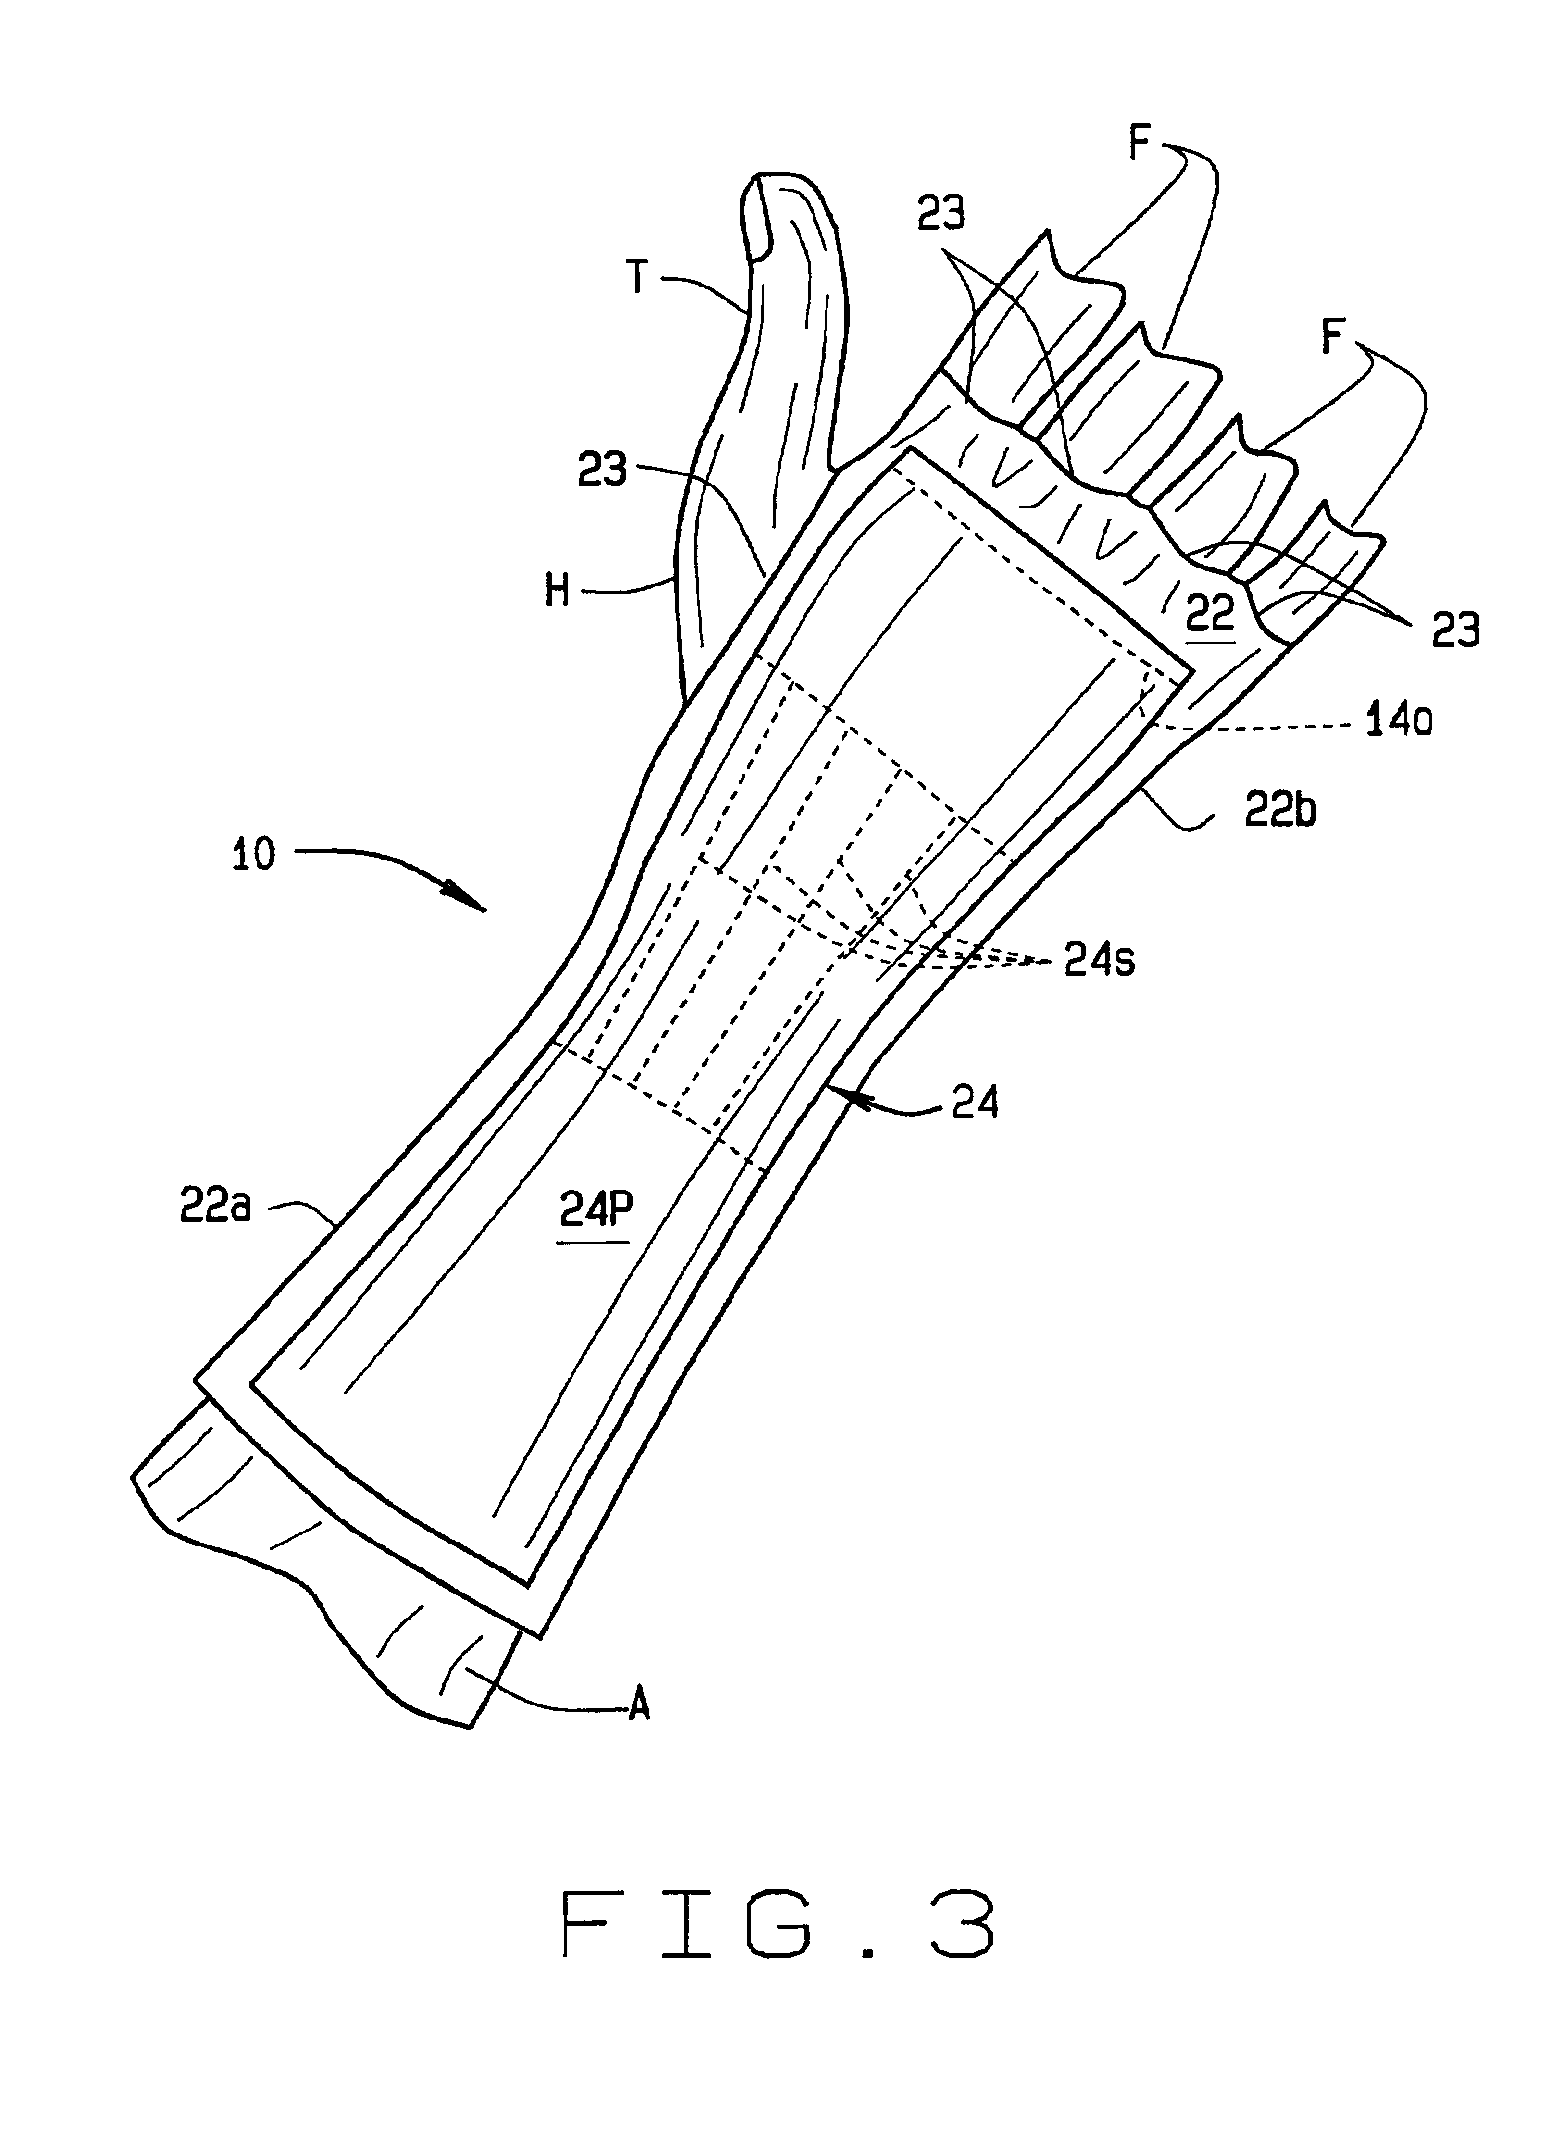 Carpal tunnel splint for wear during non-working periods